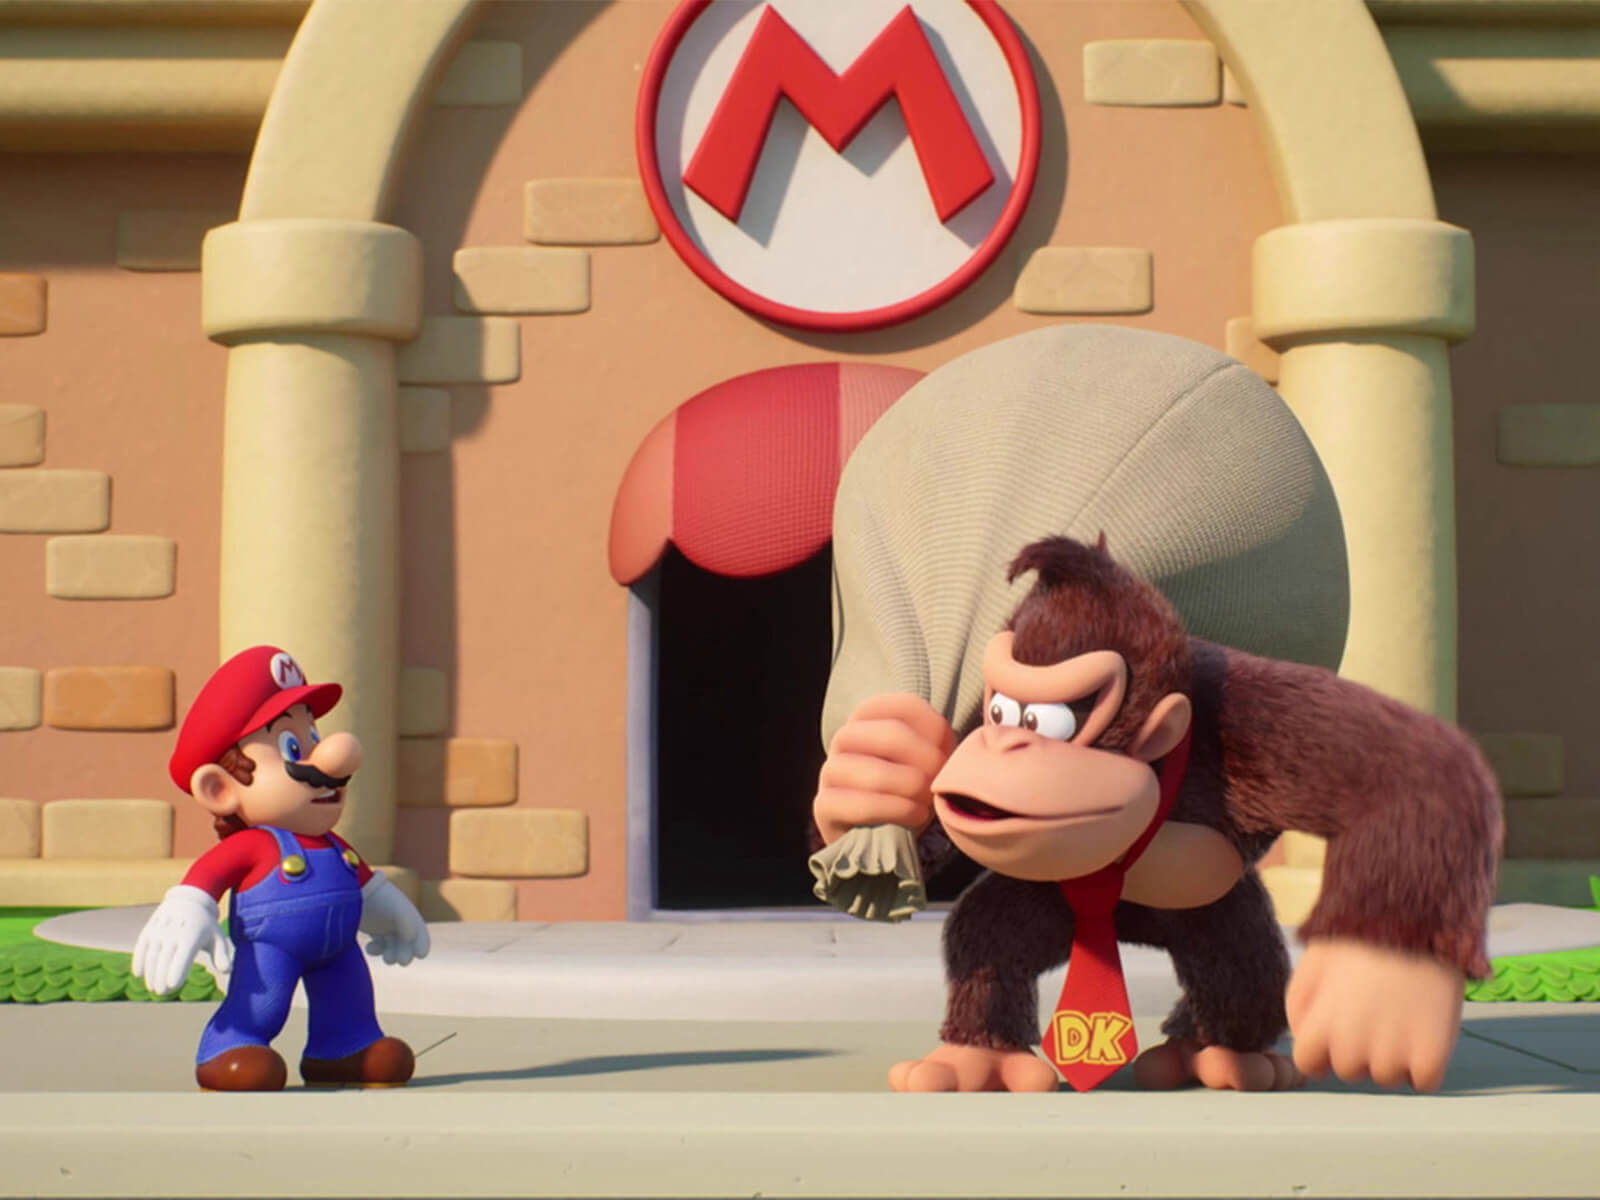 Donkey Kong holds a sack over his shoulder and faces Mario in a screenshot from Mario Vs. Donkey Kong for the Switch.